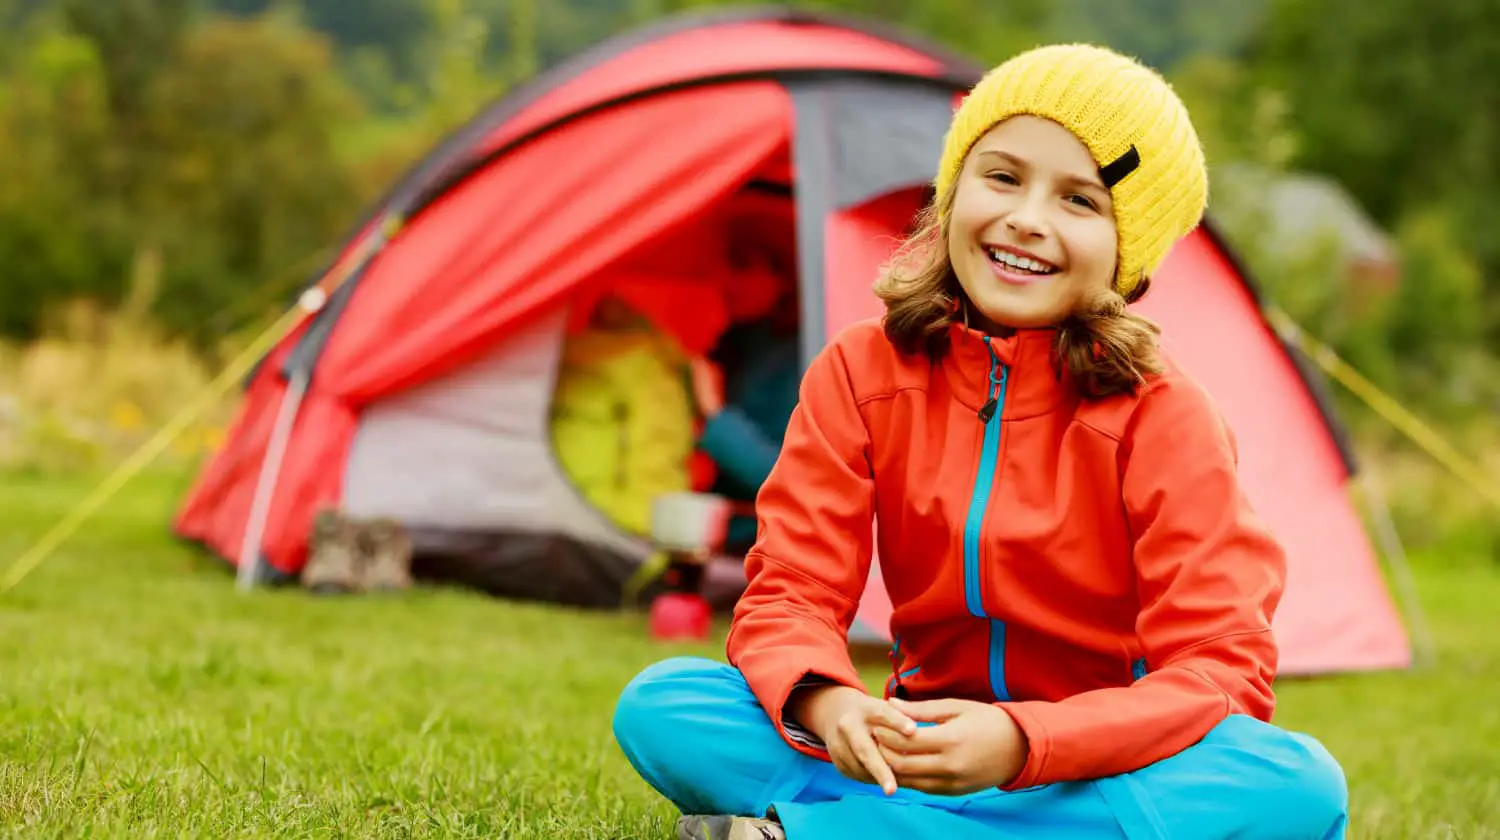 Featured | Camp in the tent - family on the camping | Best Kid's Camping Gear on Amazon (A Great Invest For Summer!)